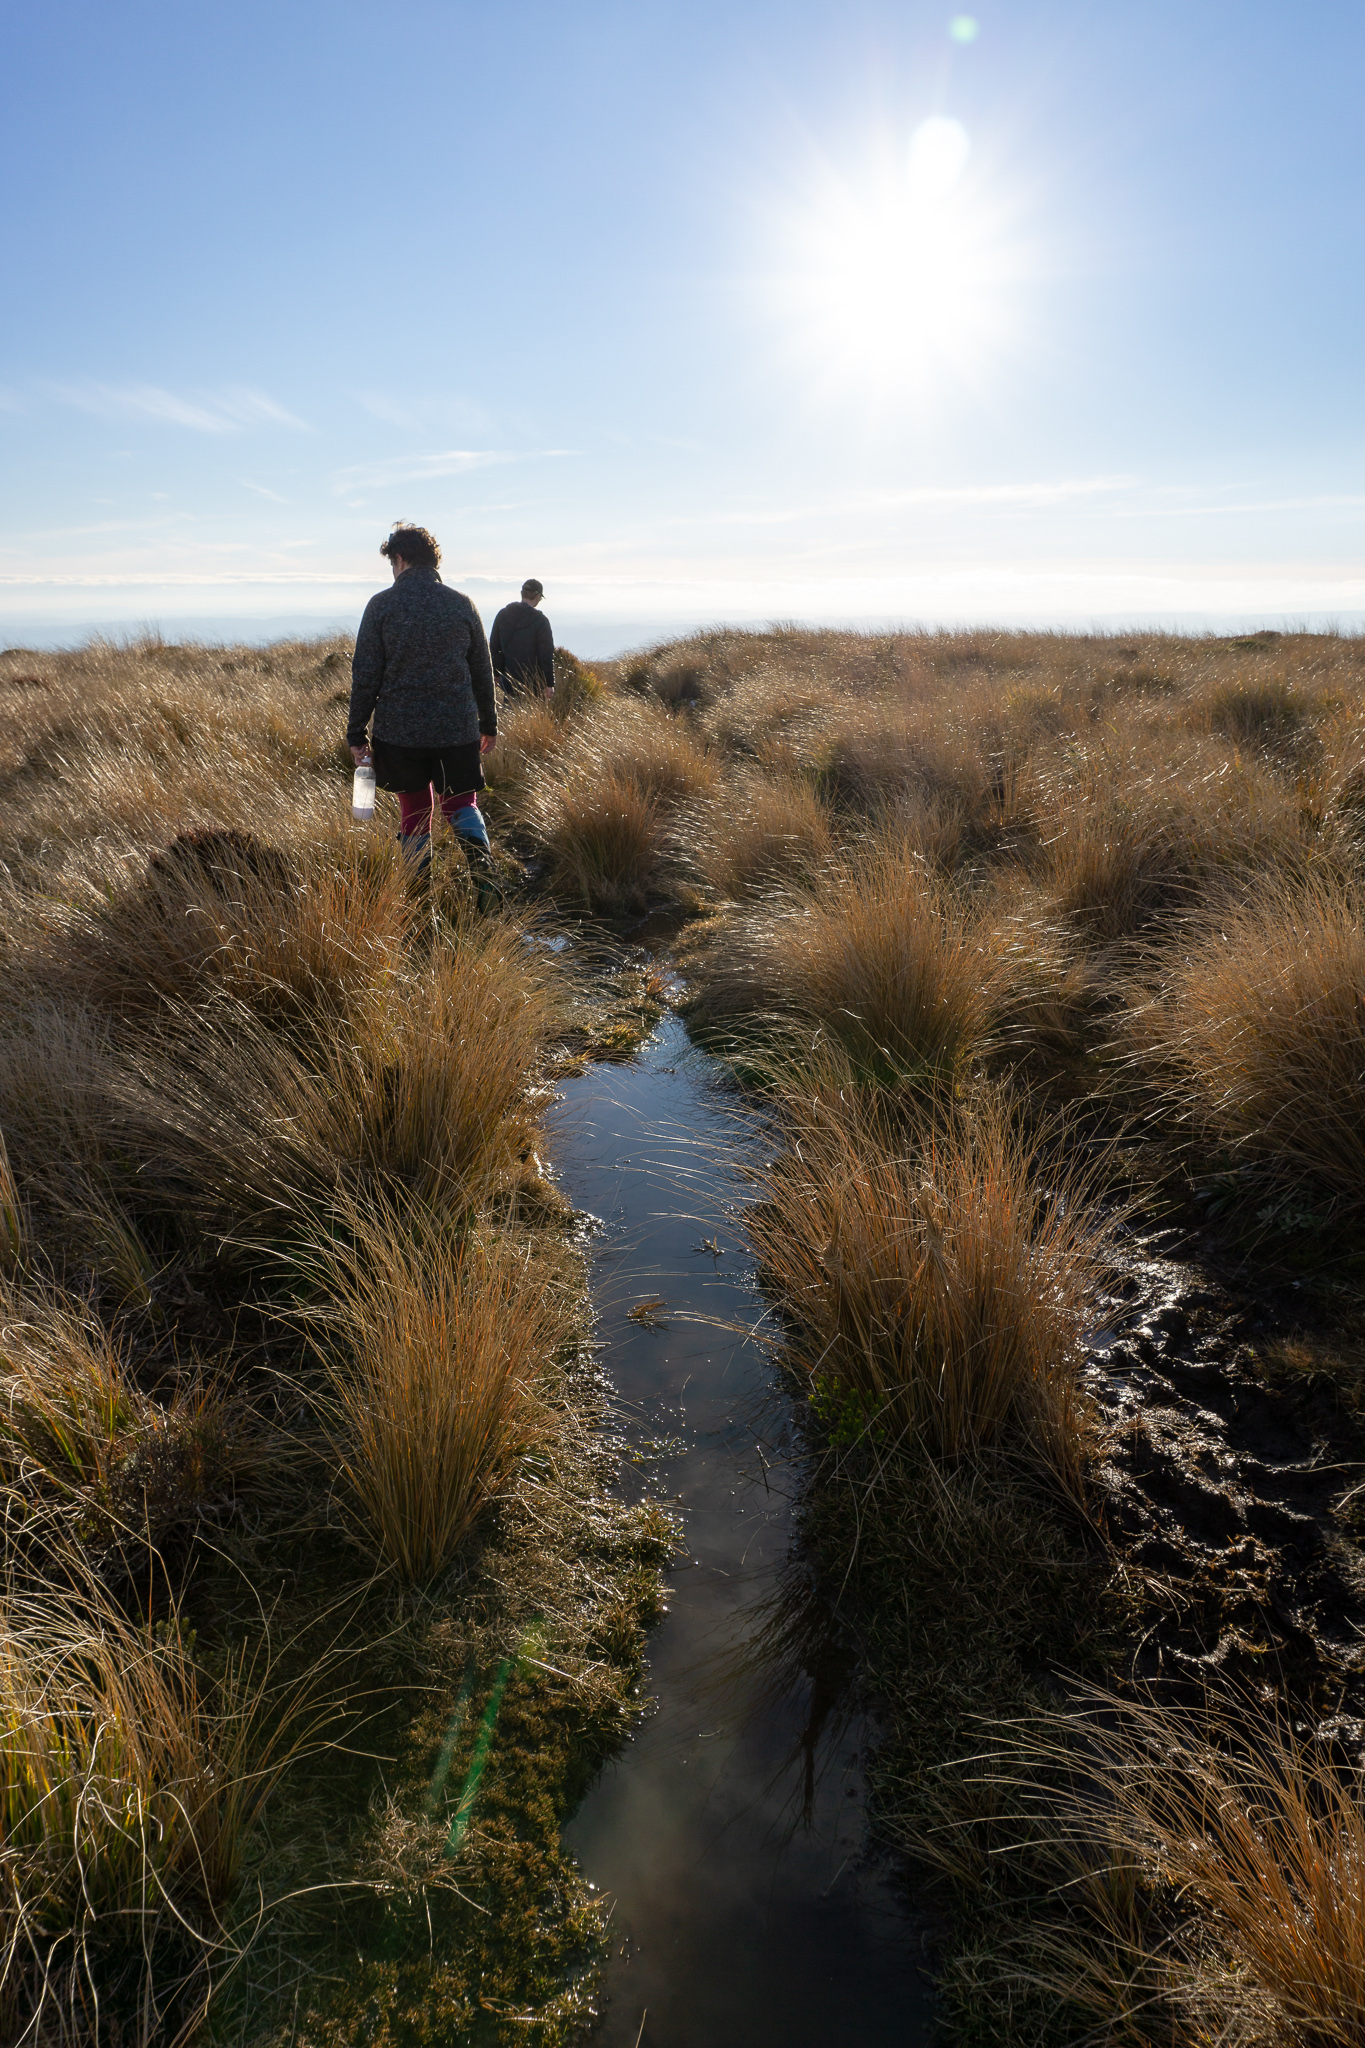 Two trampers walking through tussocks with a muddy and watery path in the foreground